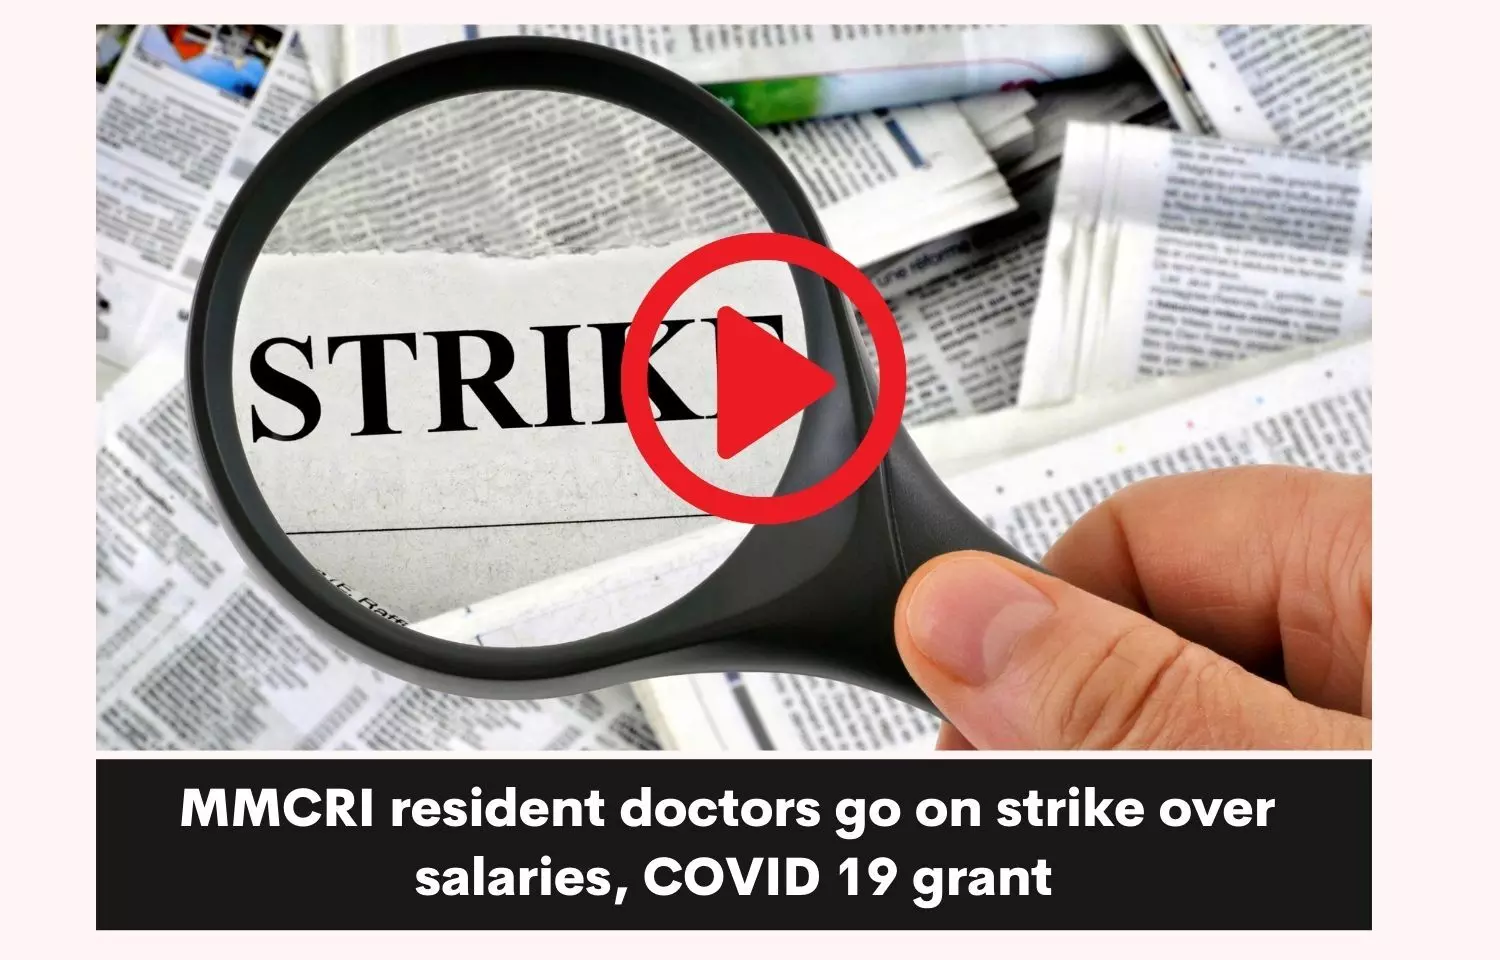 MMCRI resident doctors go on strike over non-payment of salaries